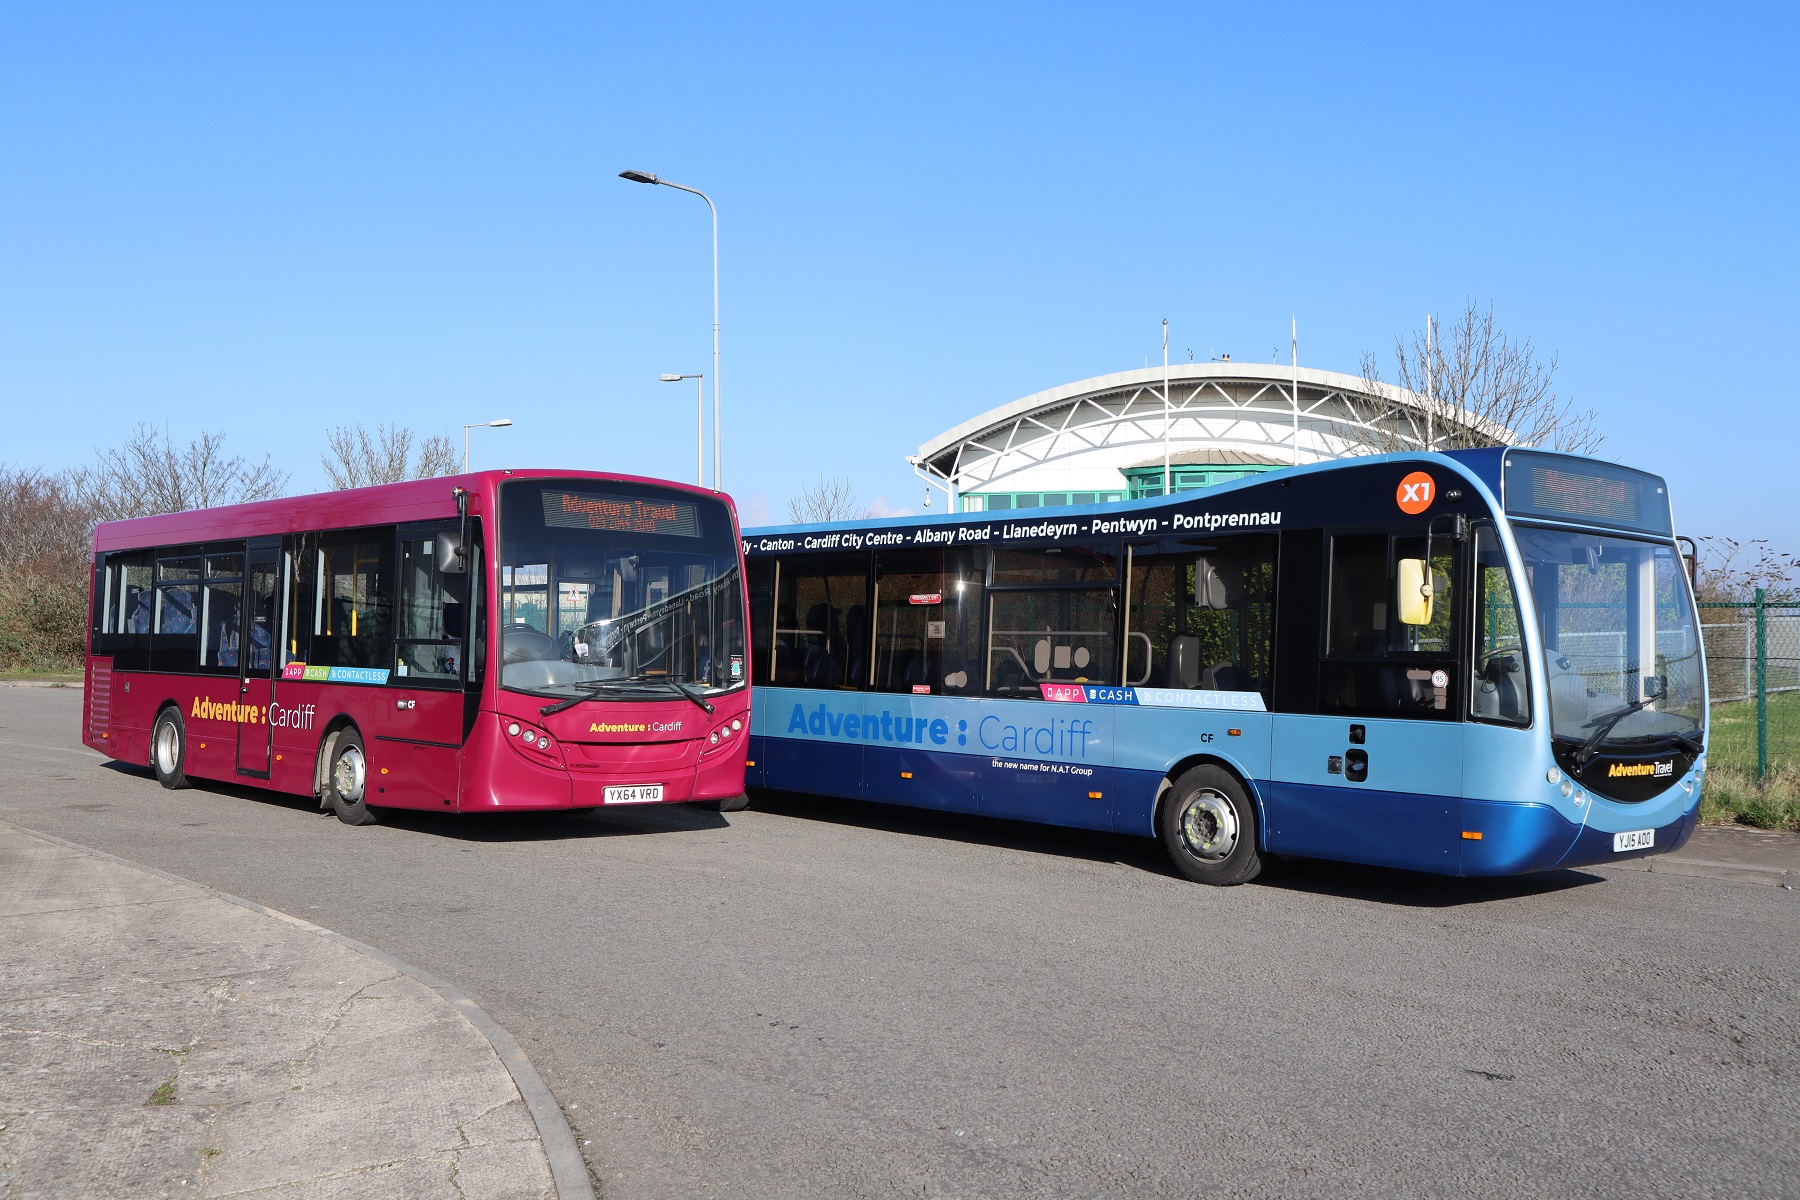 Cardiff road user payment scheme underlines need for bus funding in Wales